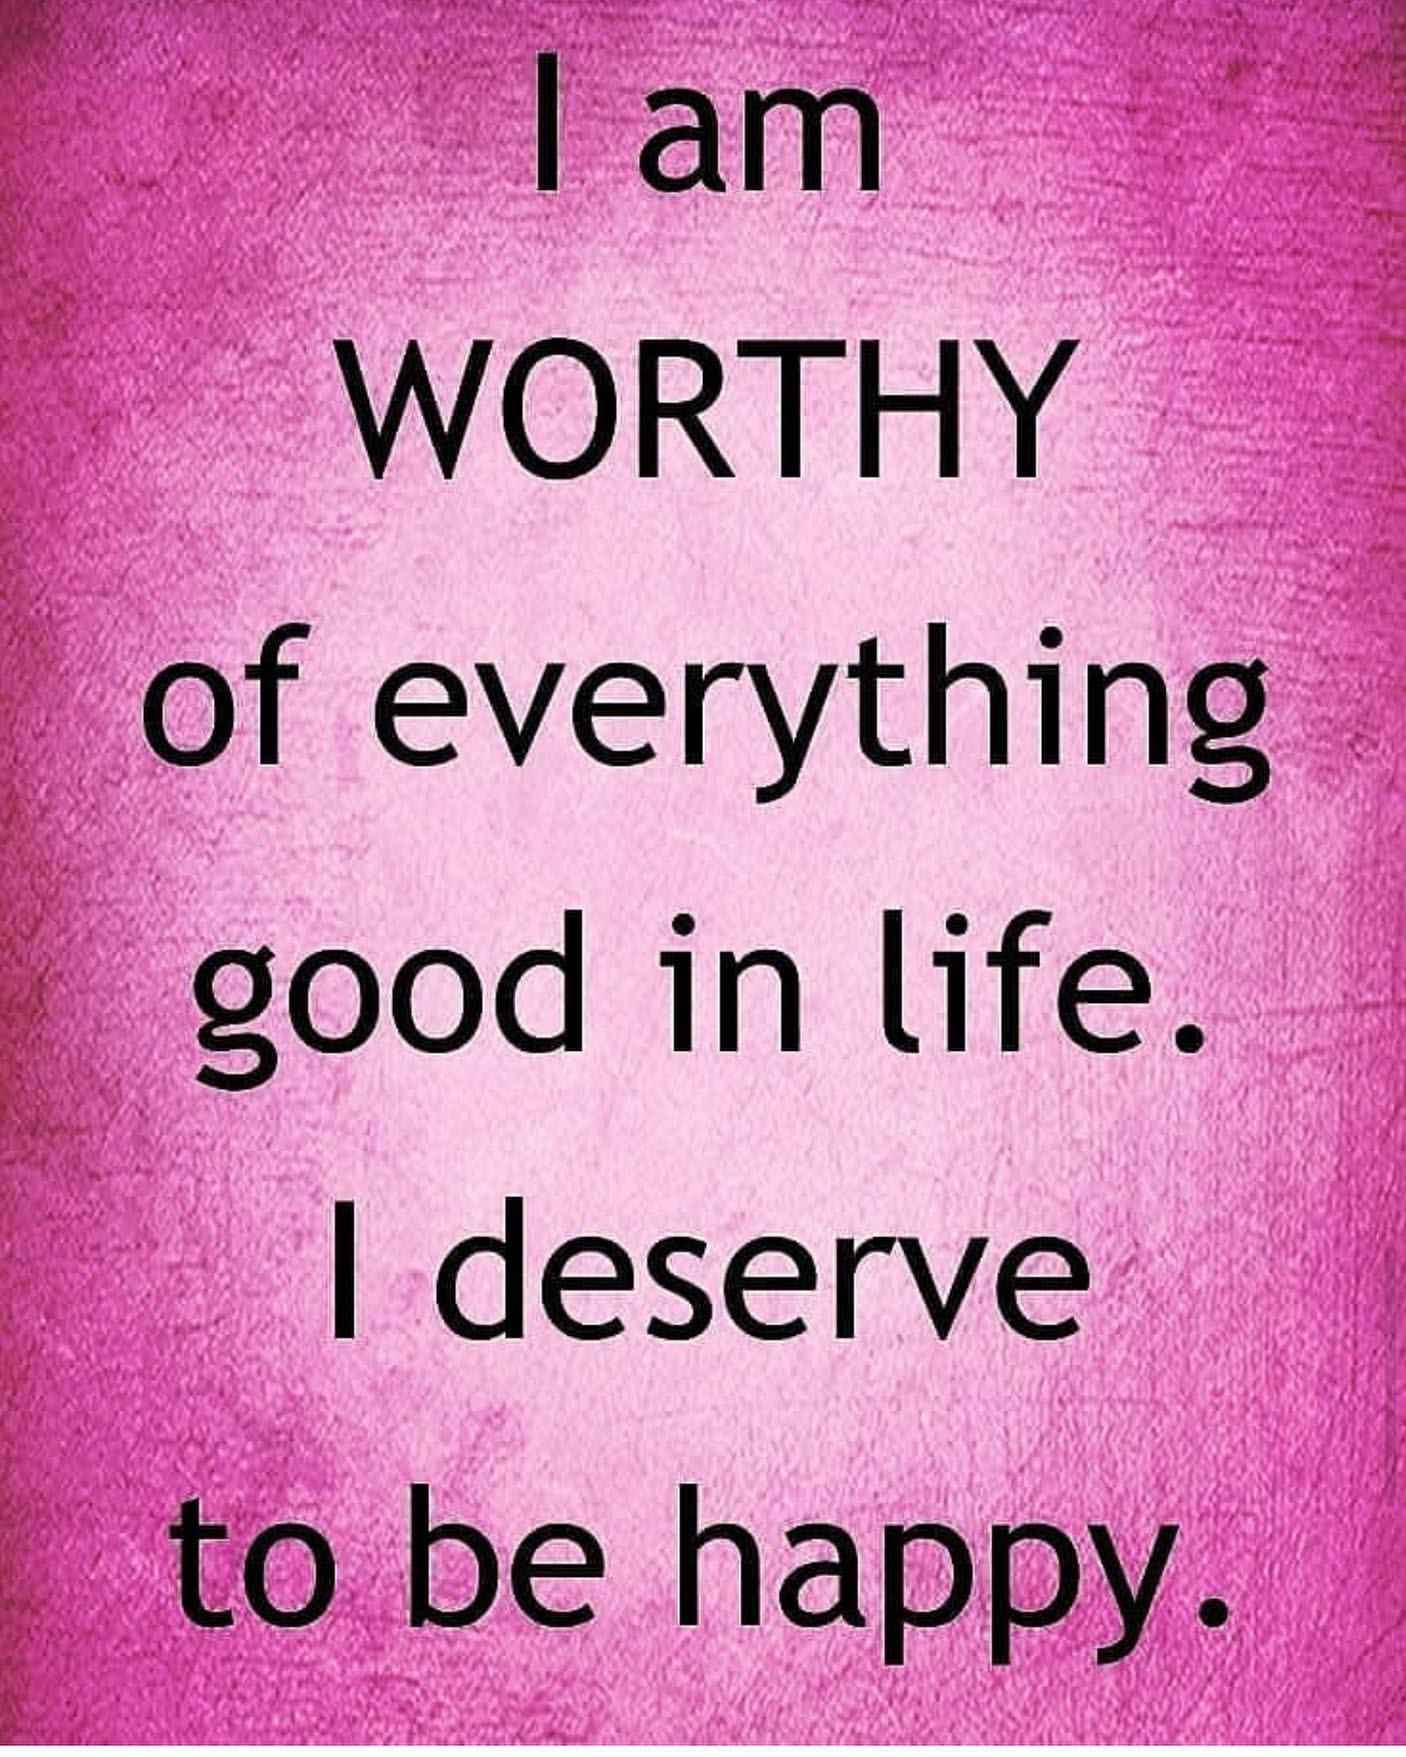 I am worthy of everything good in life. I deserve to be happy.